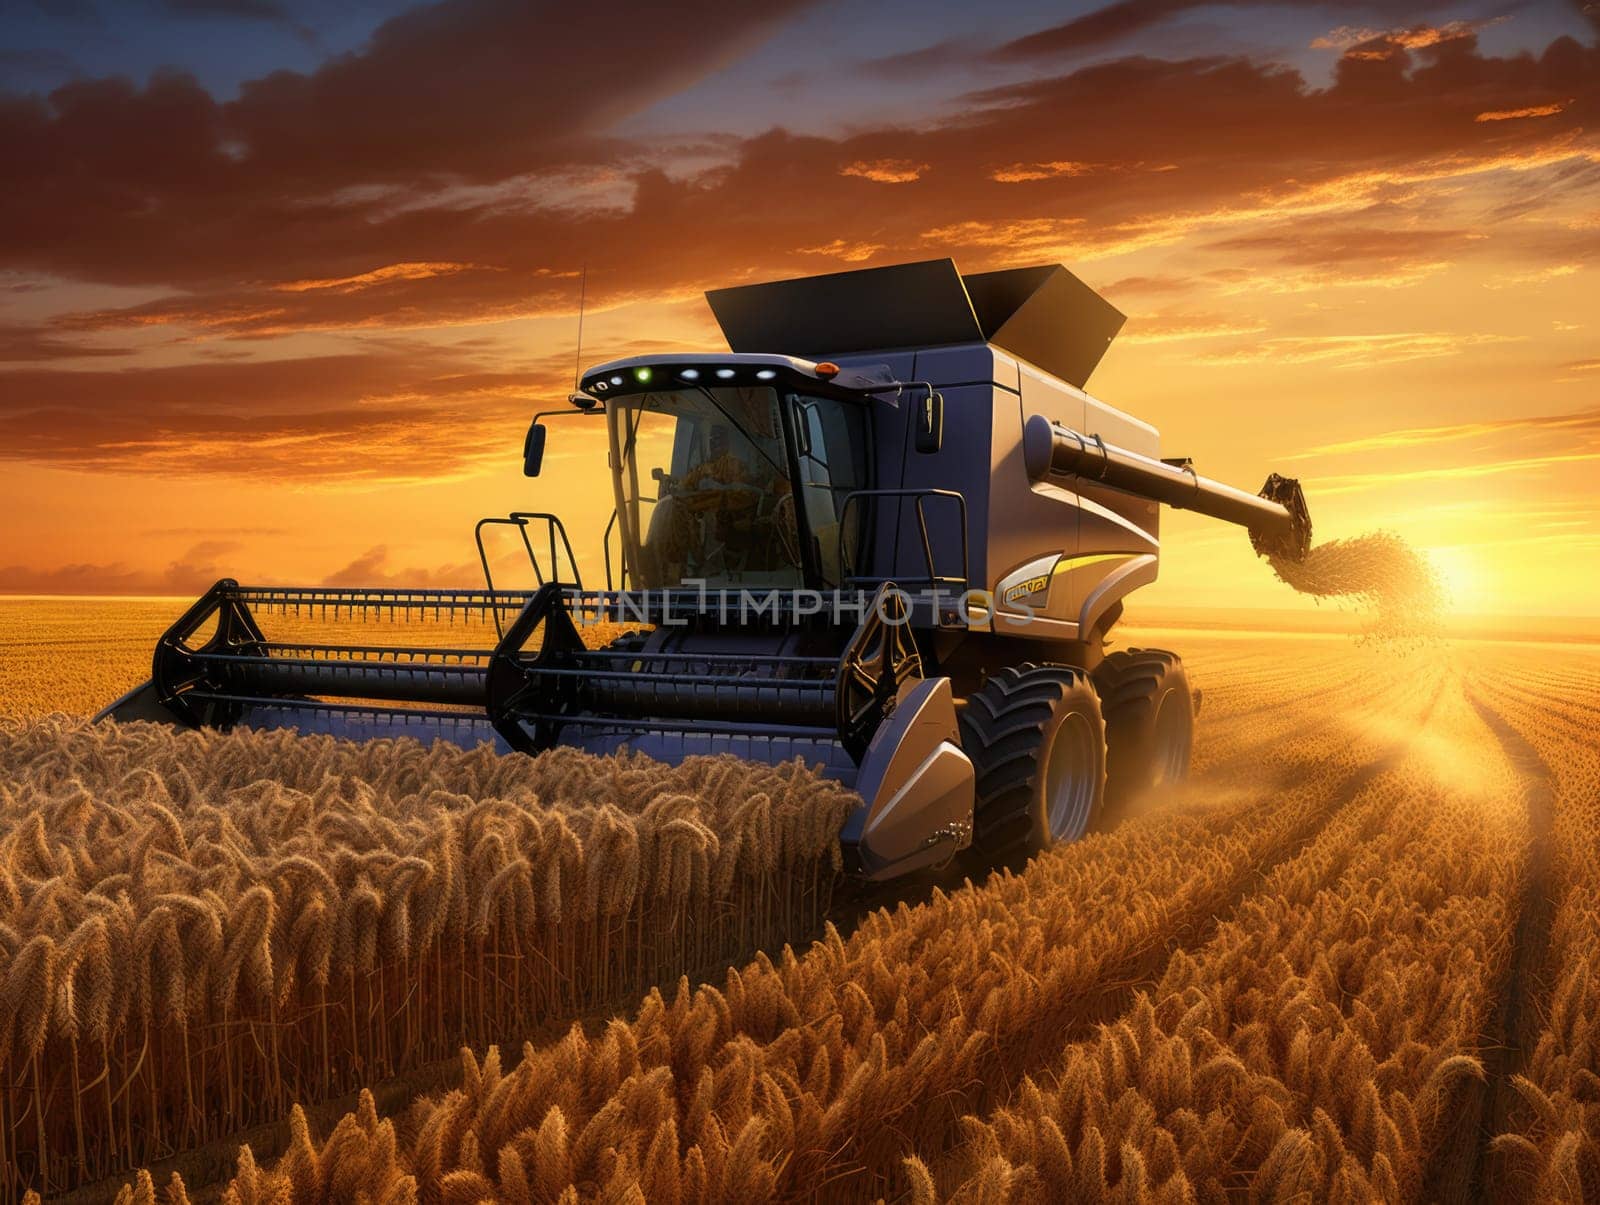 A combine machine expertly harvesting a field of wheat as the sun sets in the background.